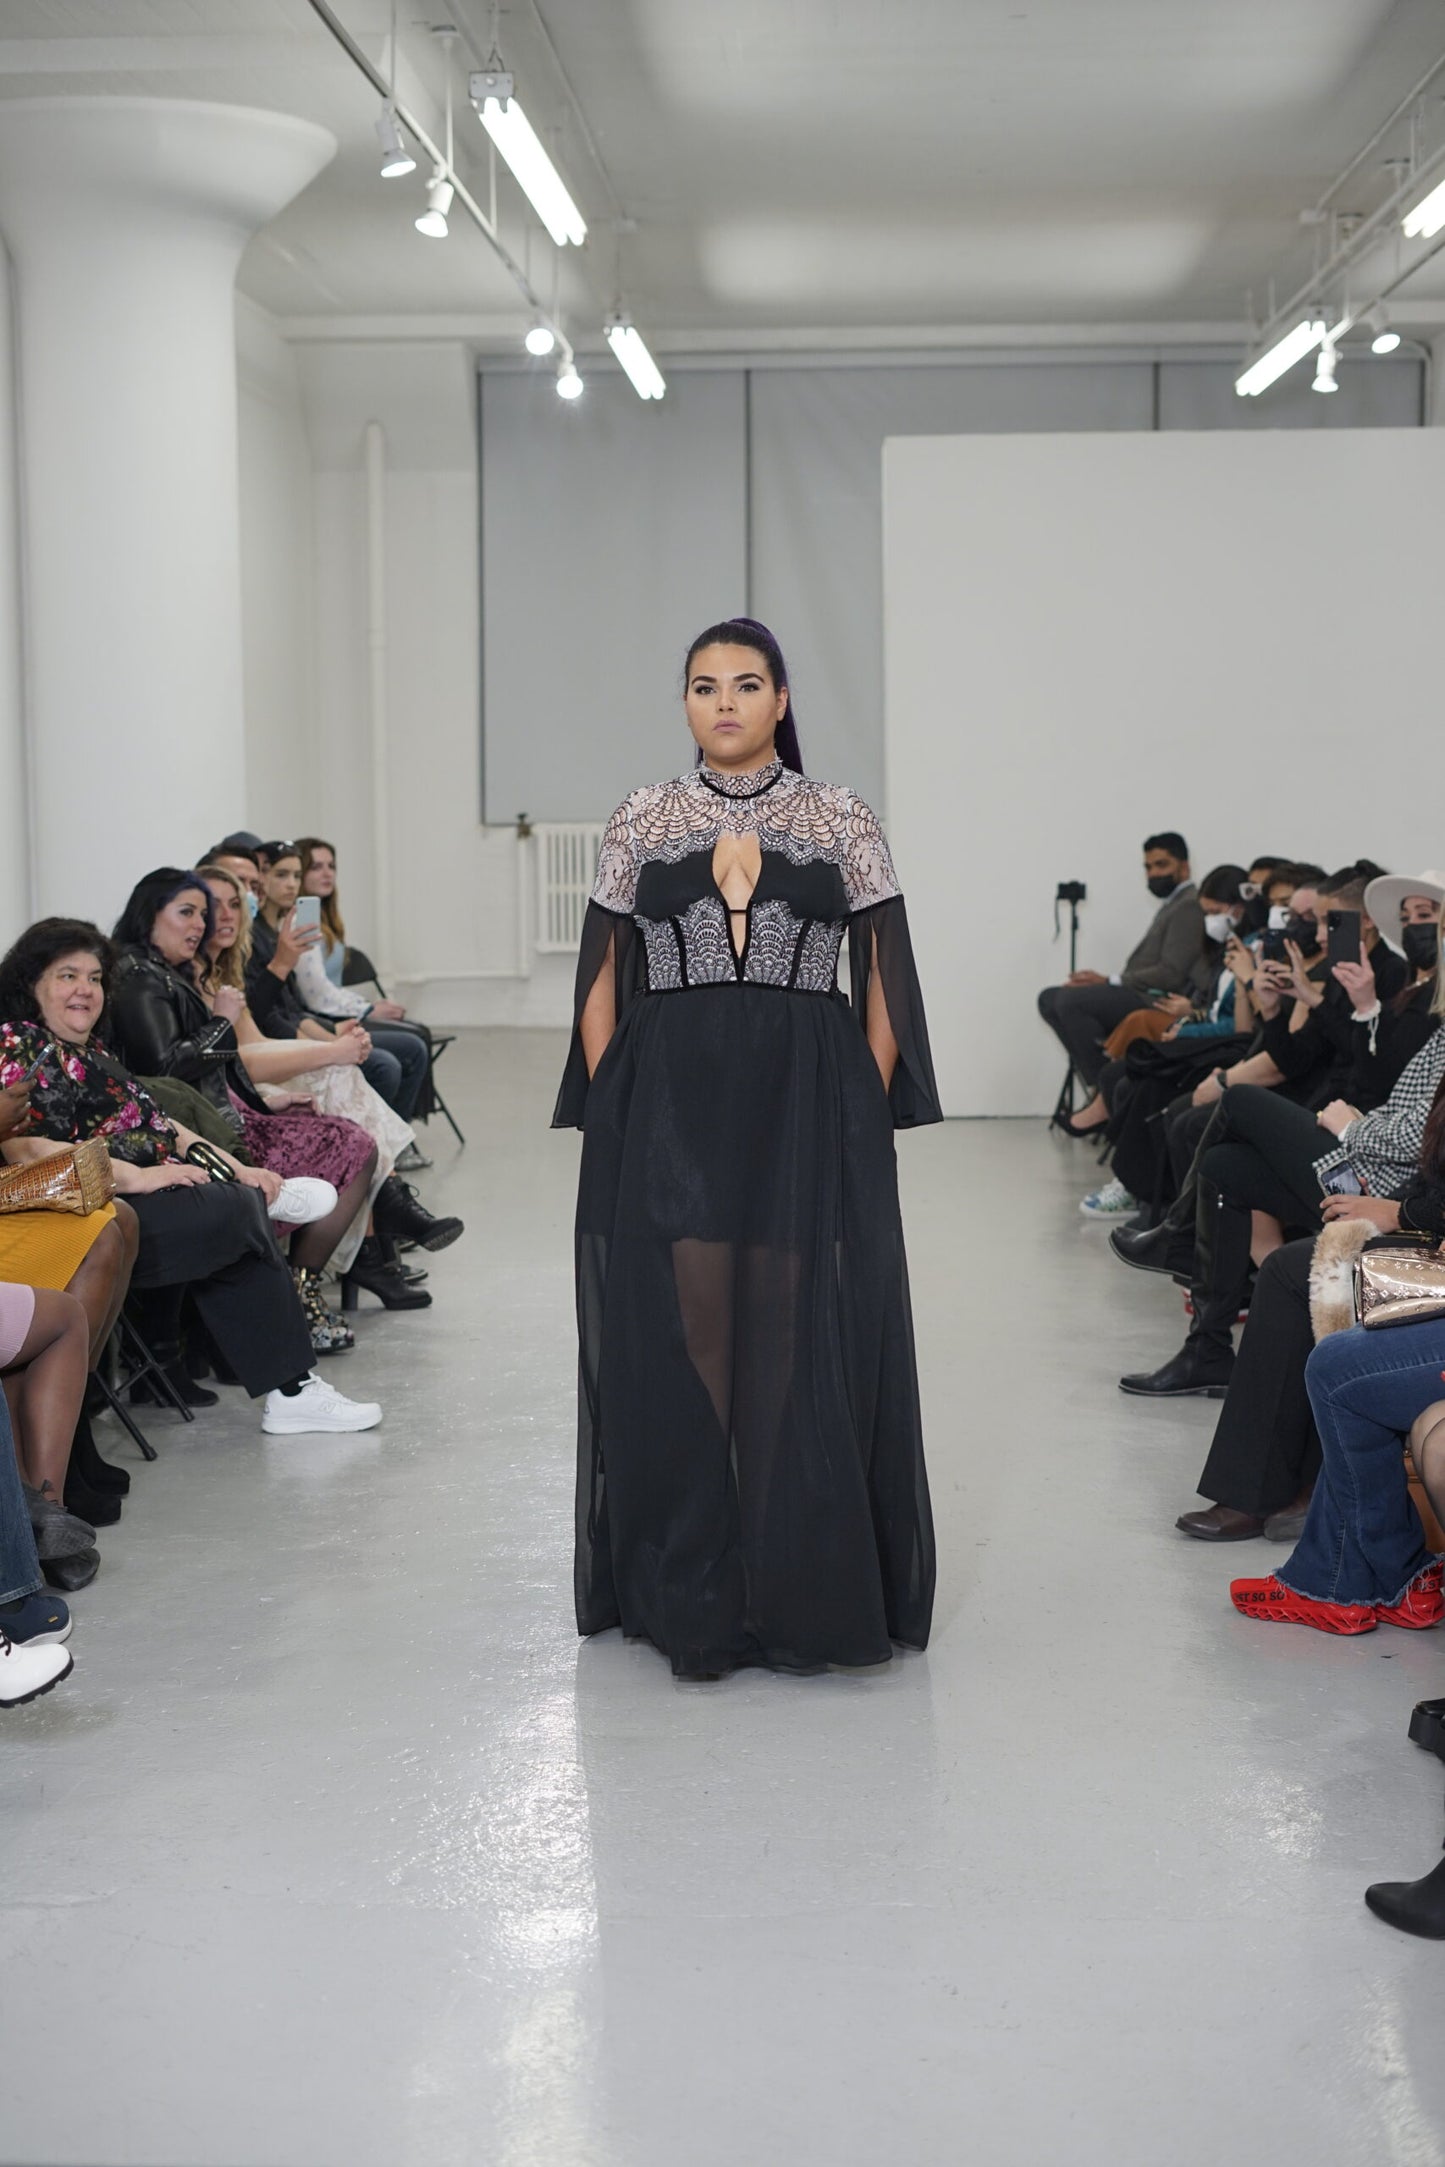 Black Chiffon Gown with Black and White Lace Details